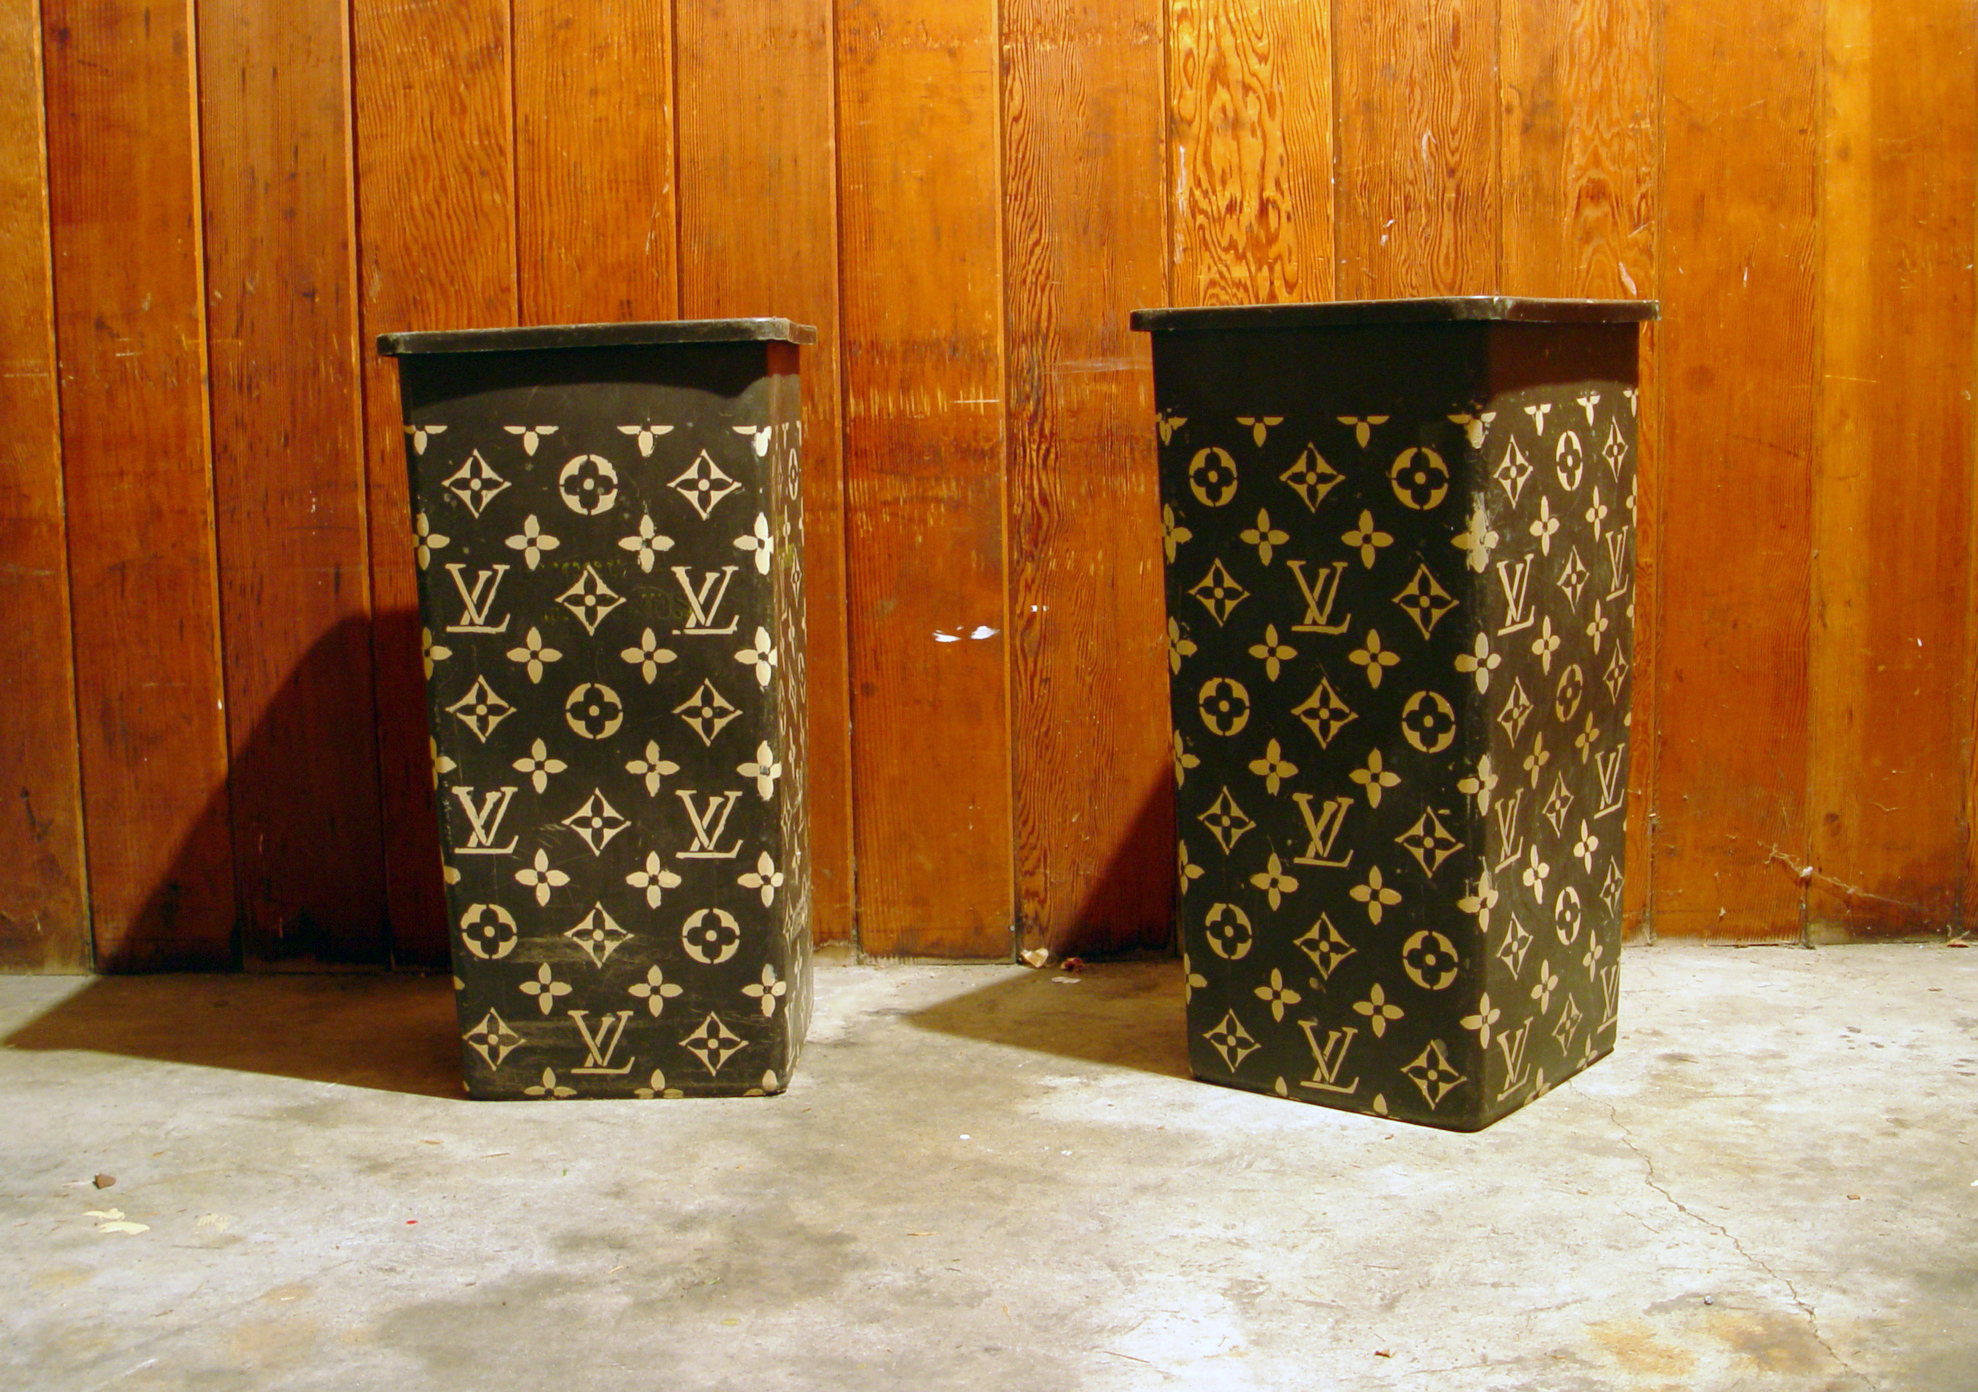 The finished product: Louis Vuitton trash cans | Flickr - Photo Sharing!